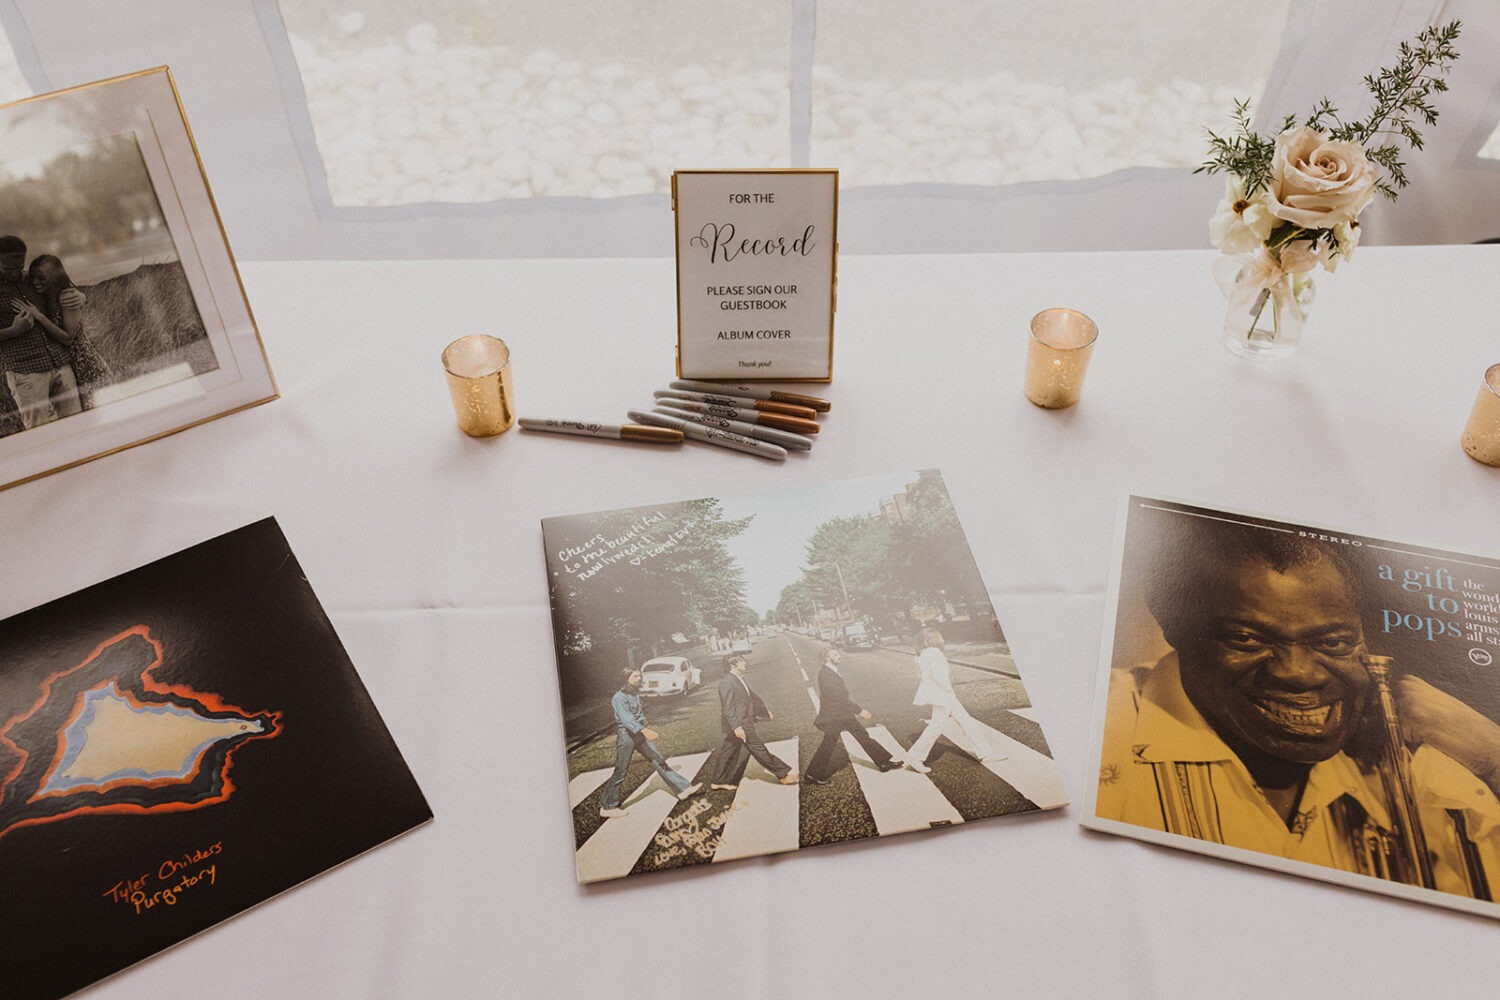 music-themed wedding style with vinyl records for guest book